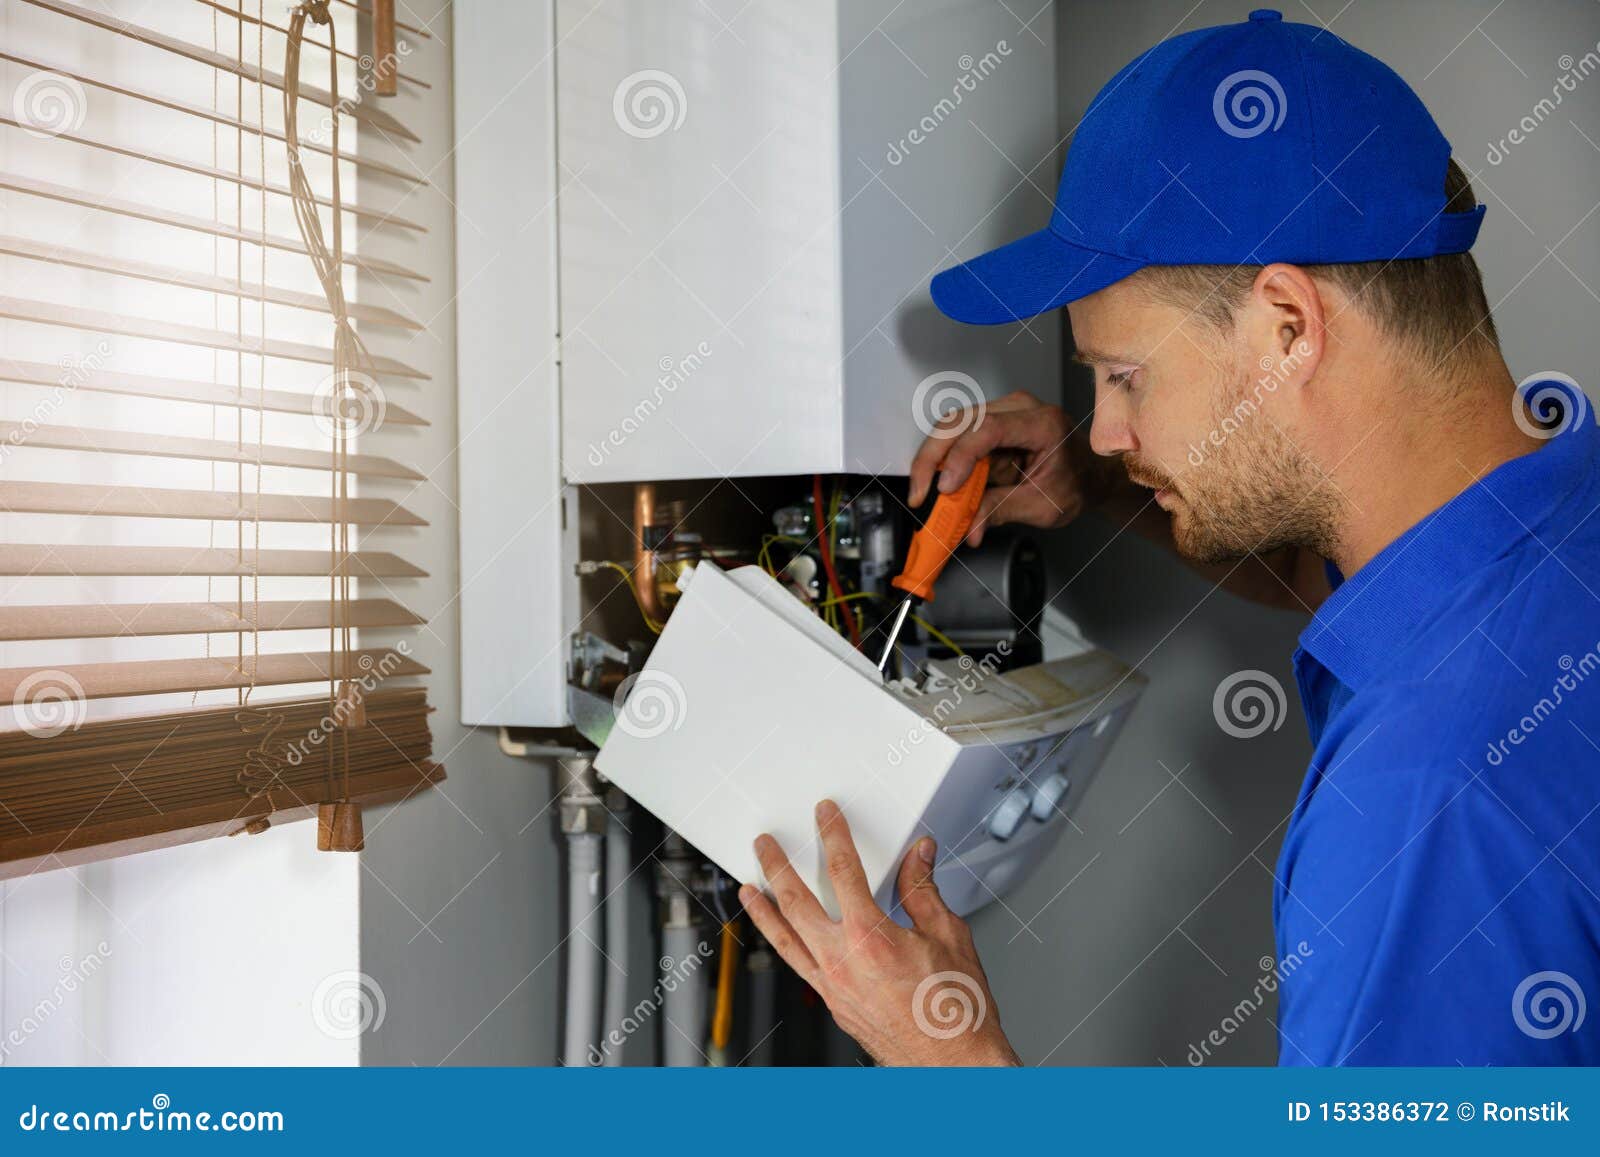 house gas heating boiler maintenance and repair service